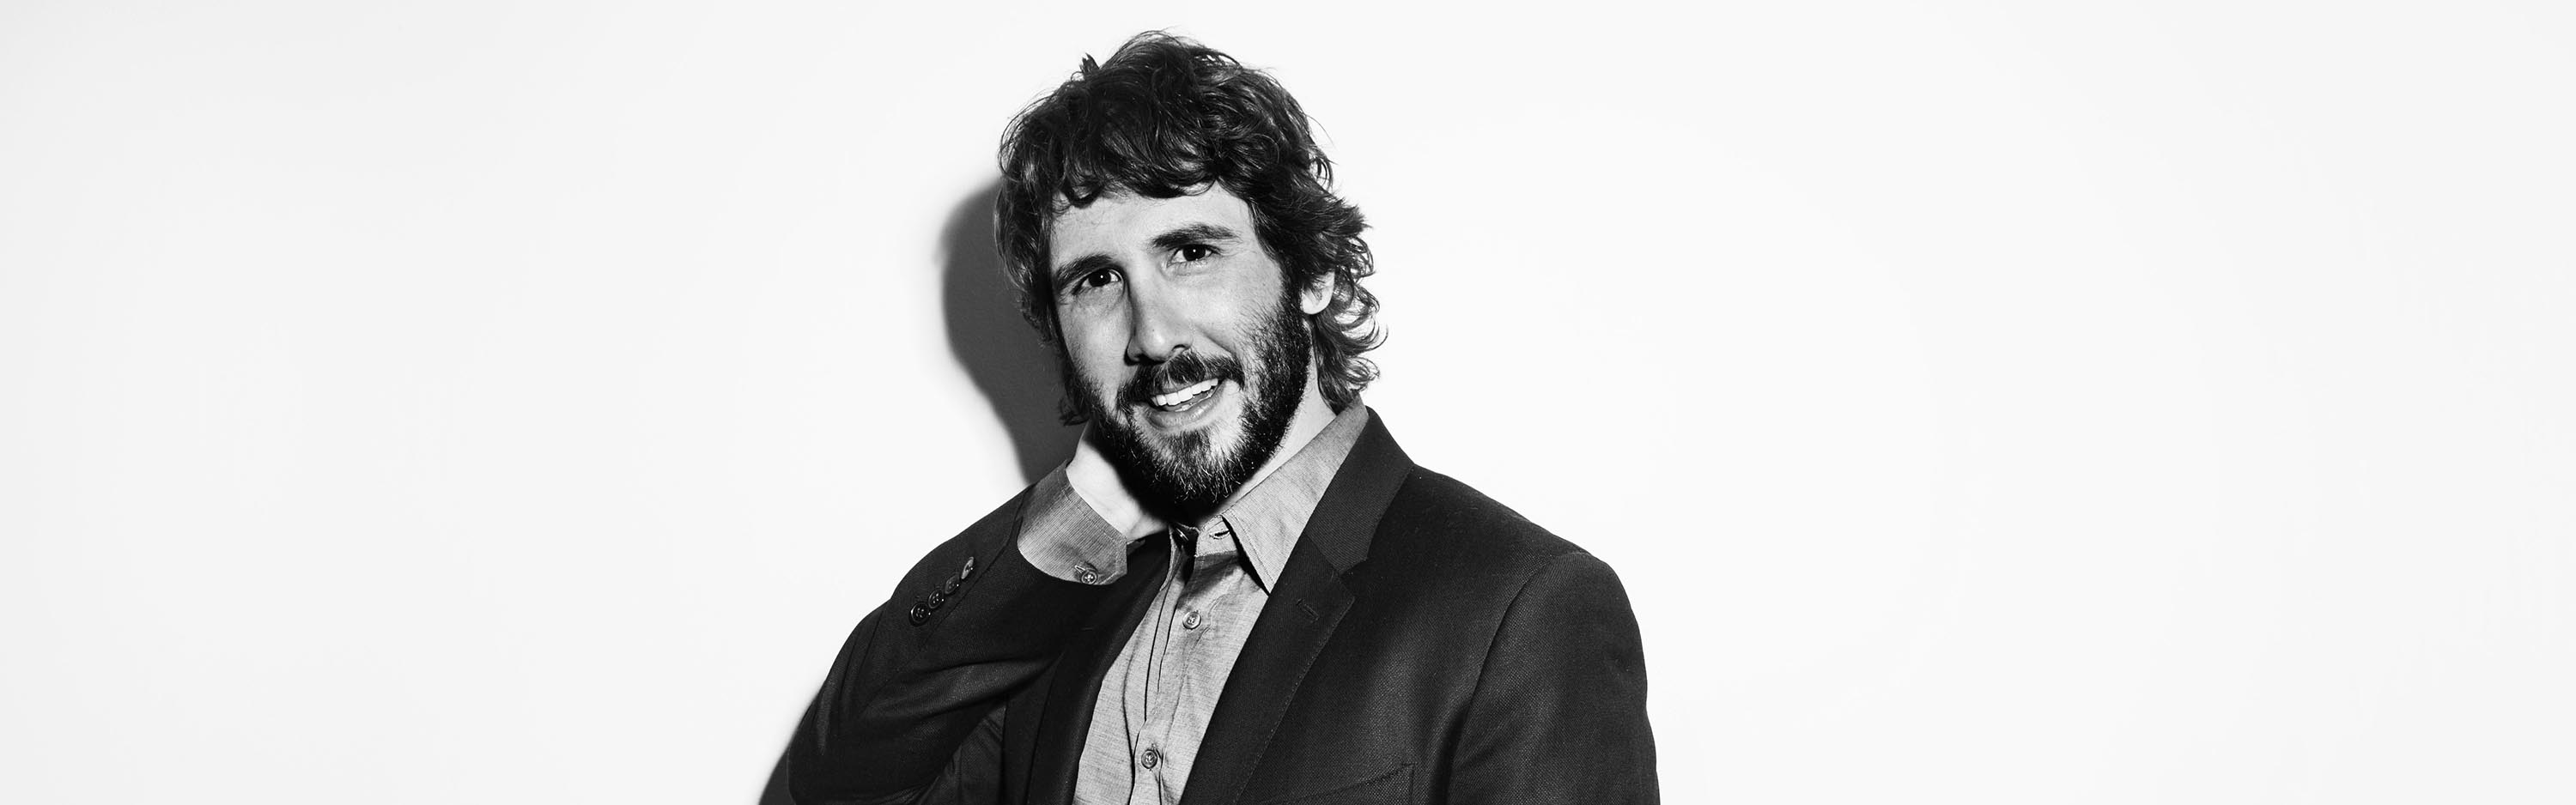 Josh Groban Photo by Taylor Jewell/Invision/AP